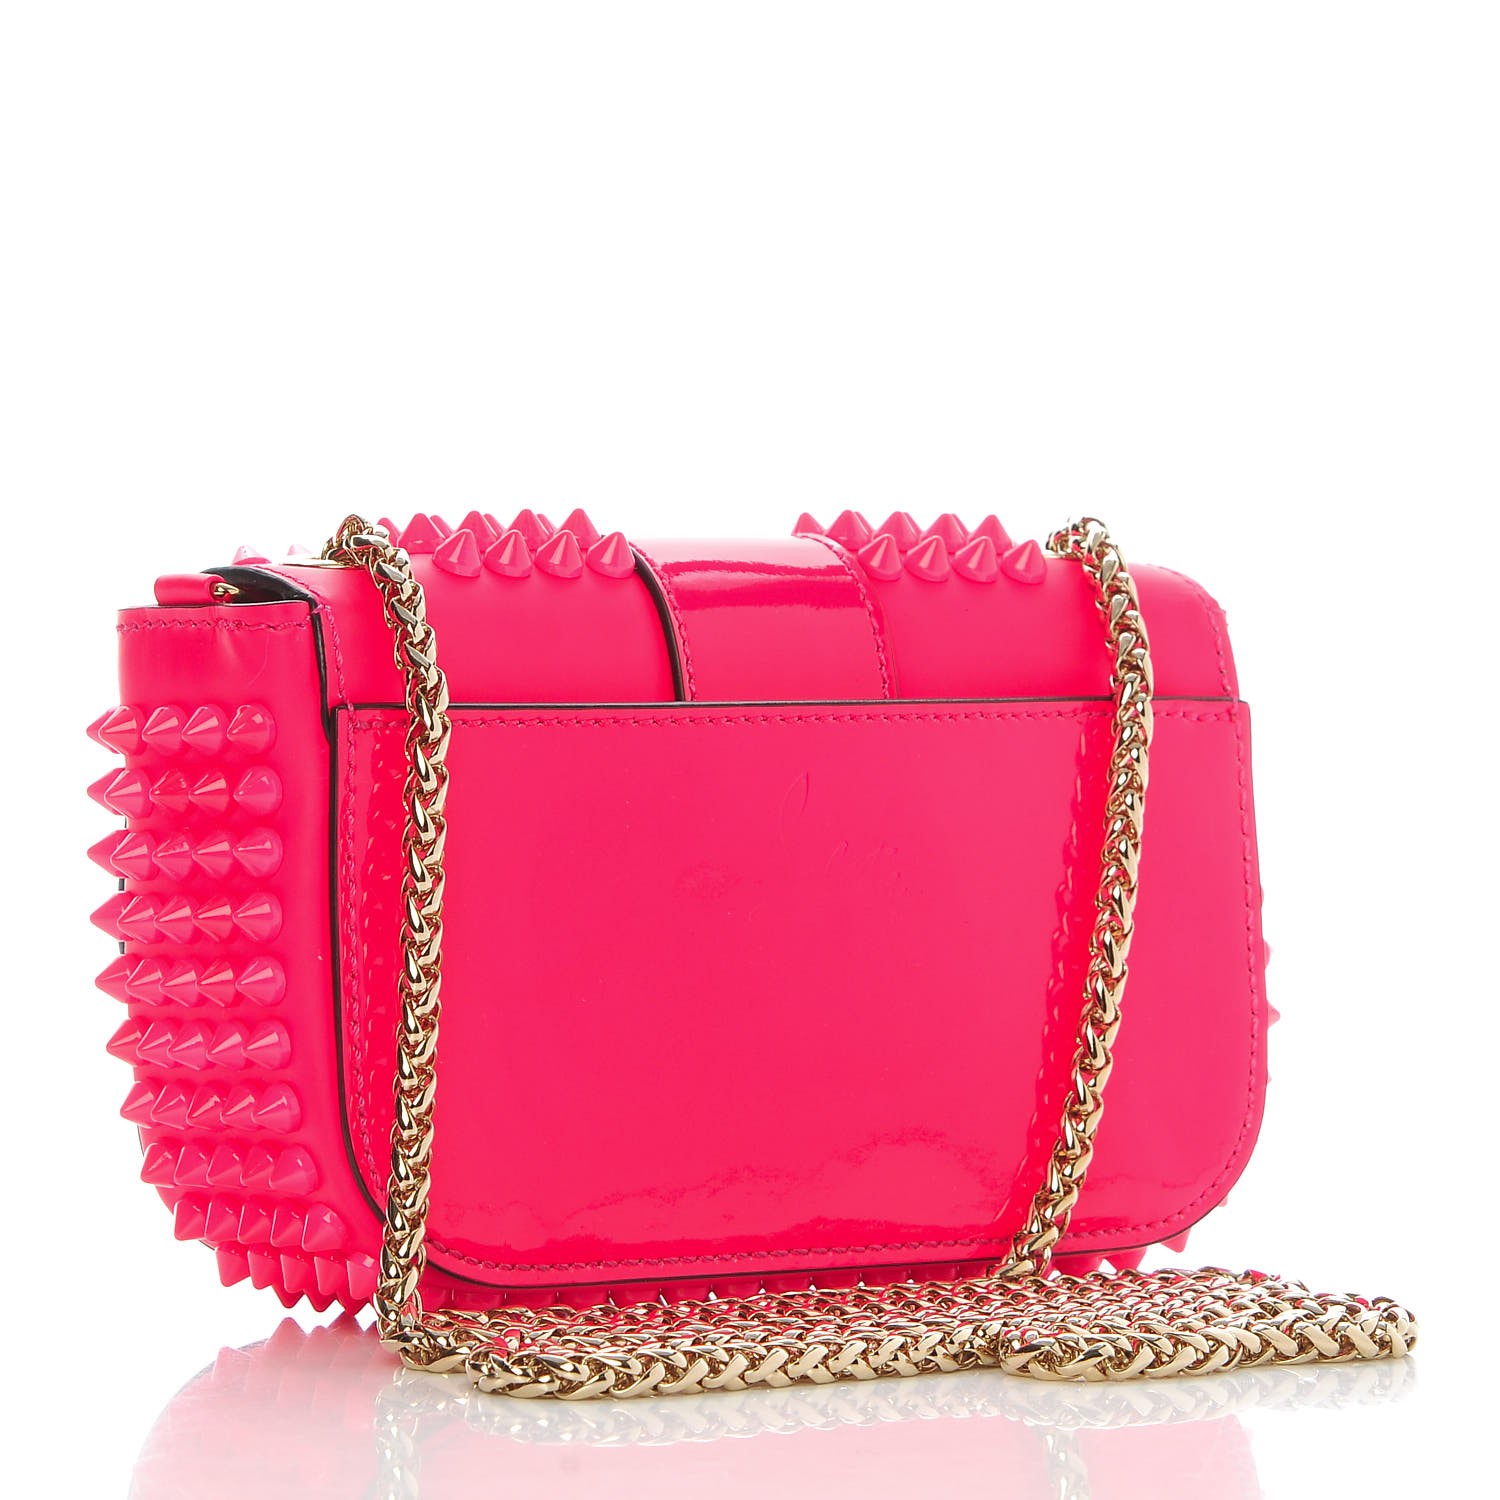 CHRISTIAN LOUBOUTIN Patent Spiked Sweety Charity Crossbody Bag Neon ...